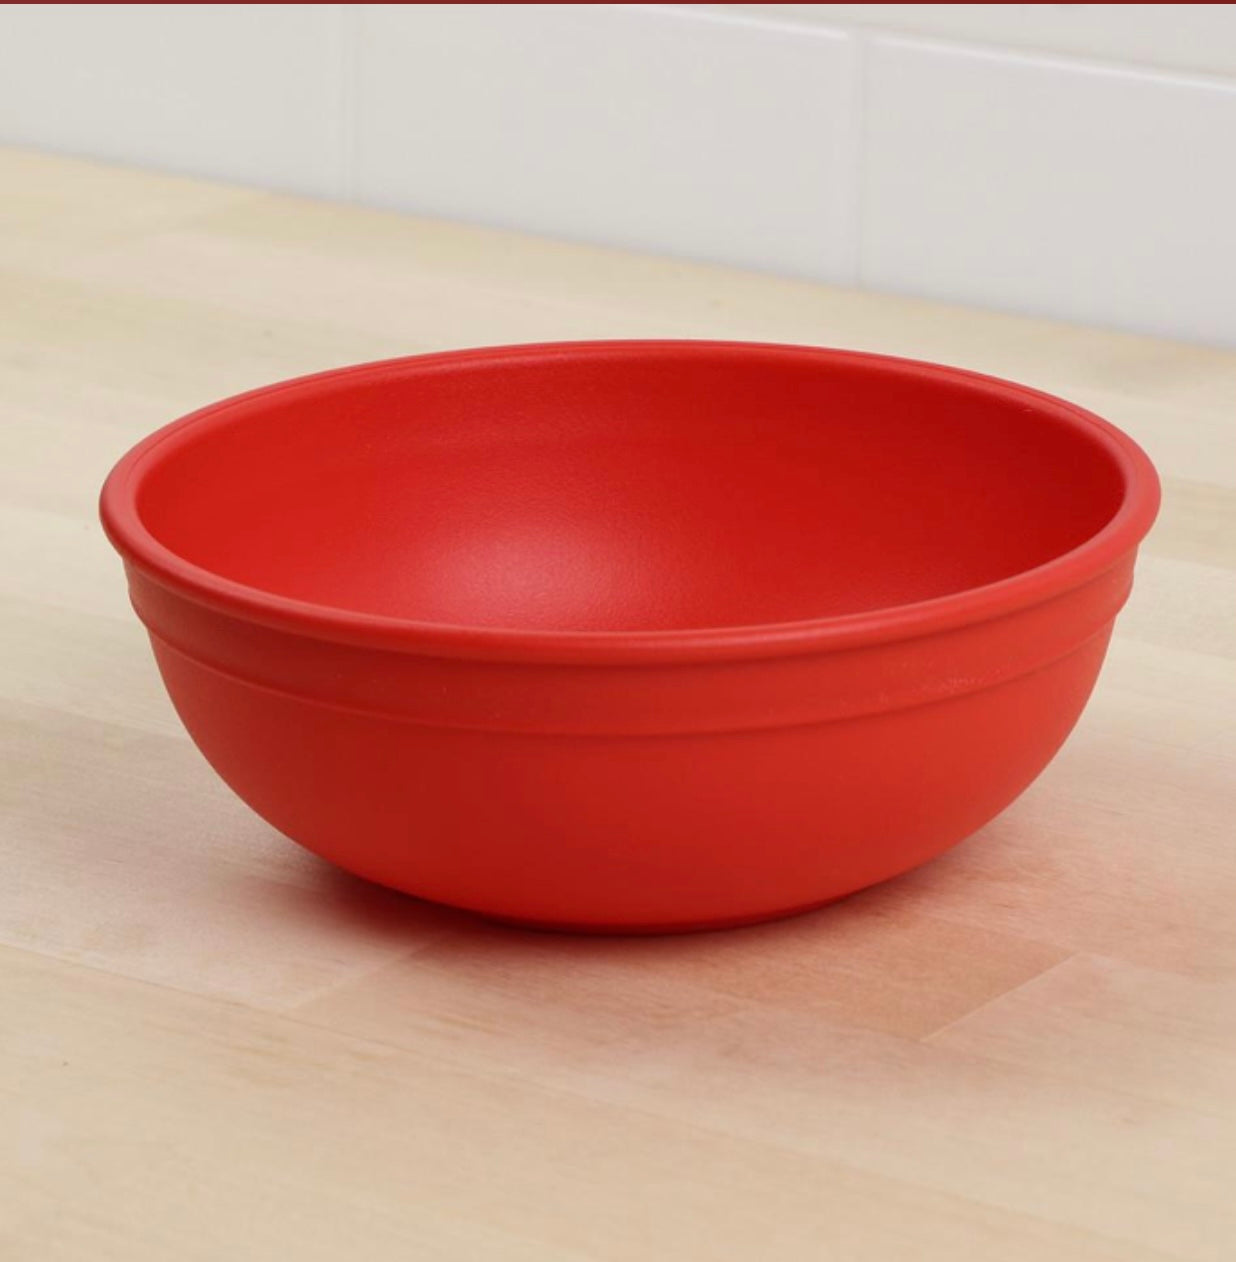 Re-Play Large Bowl - Red